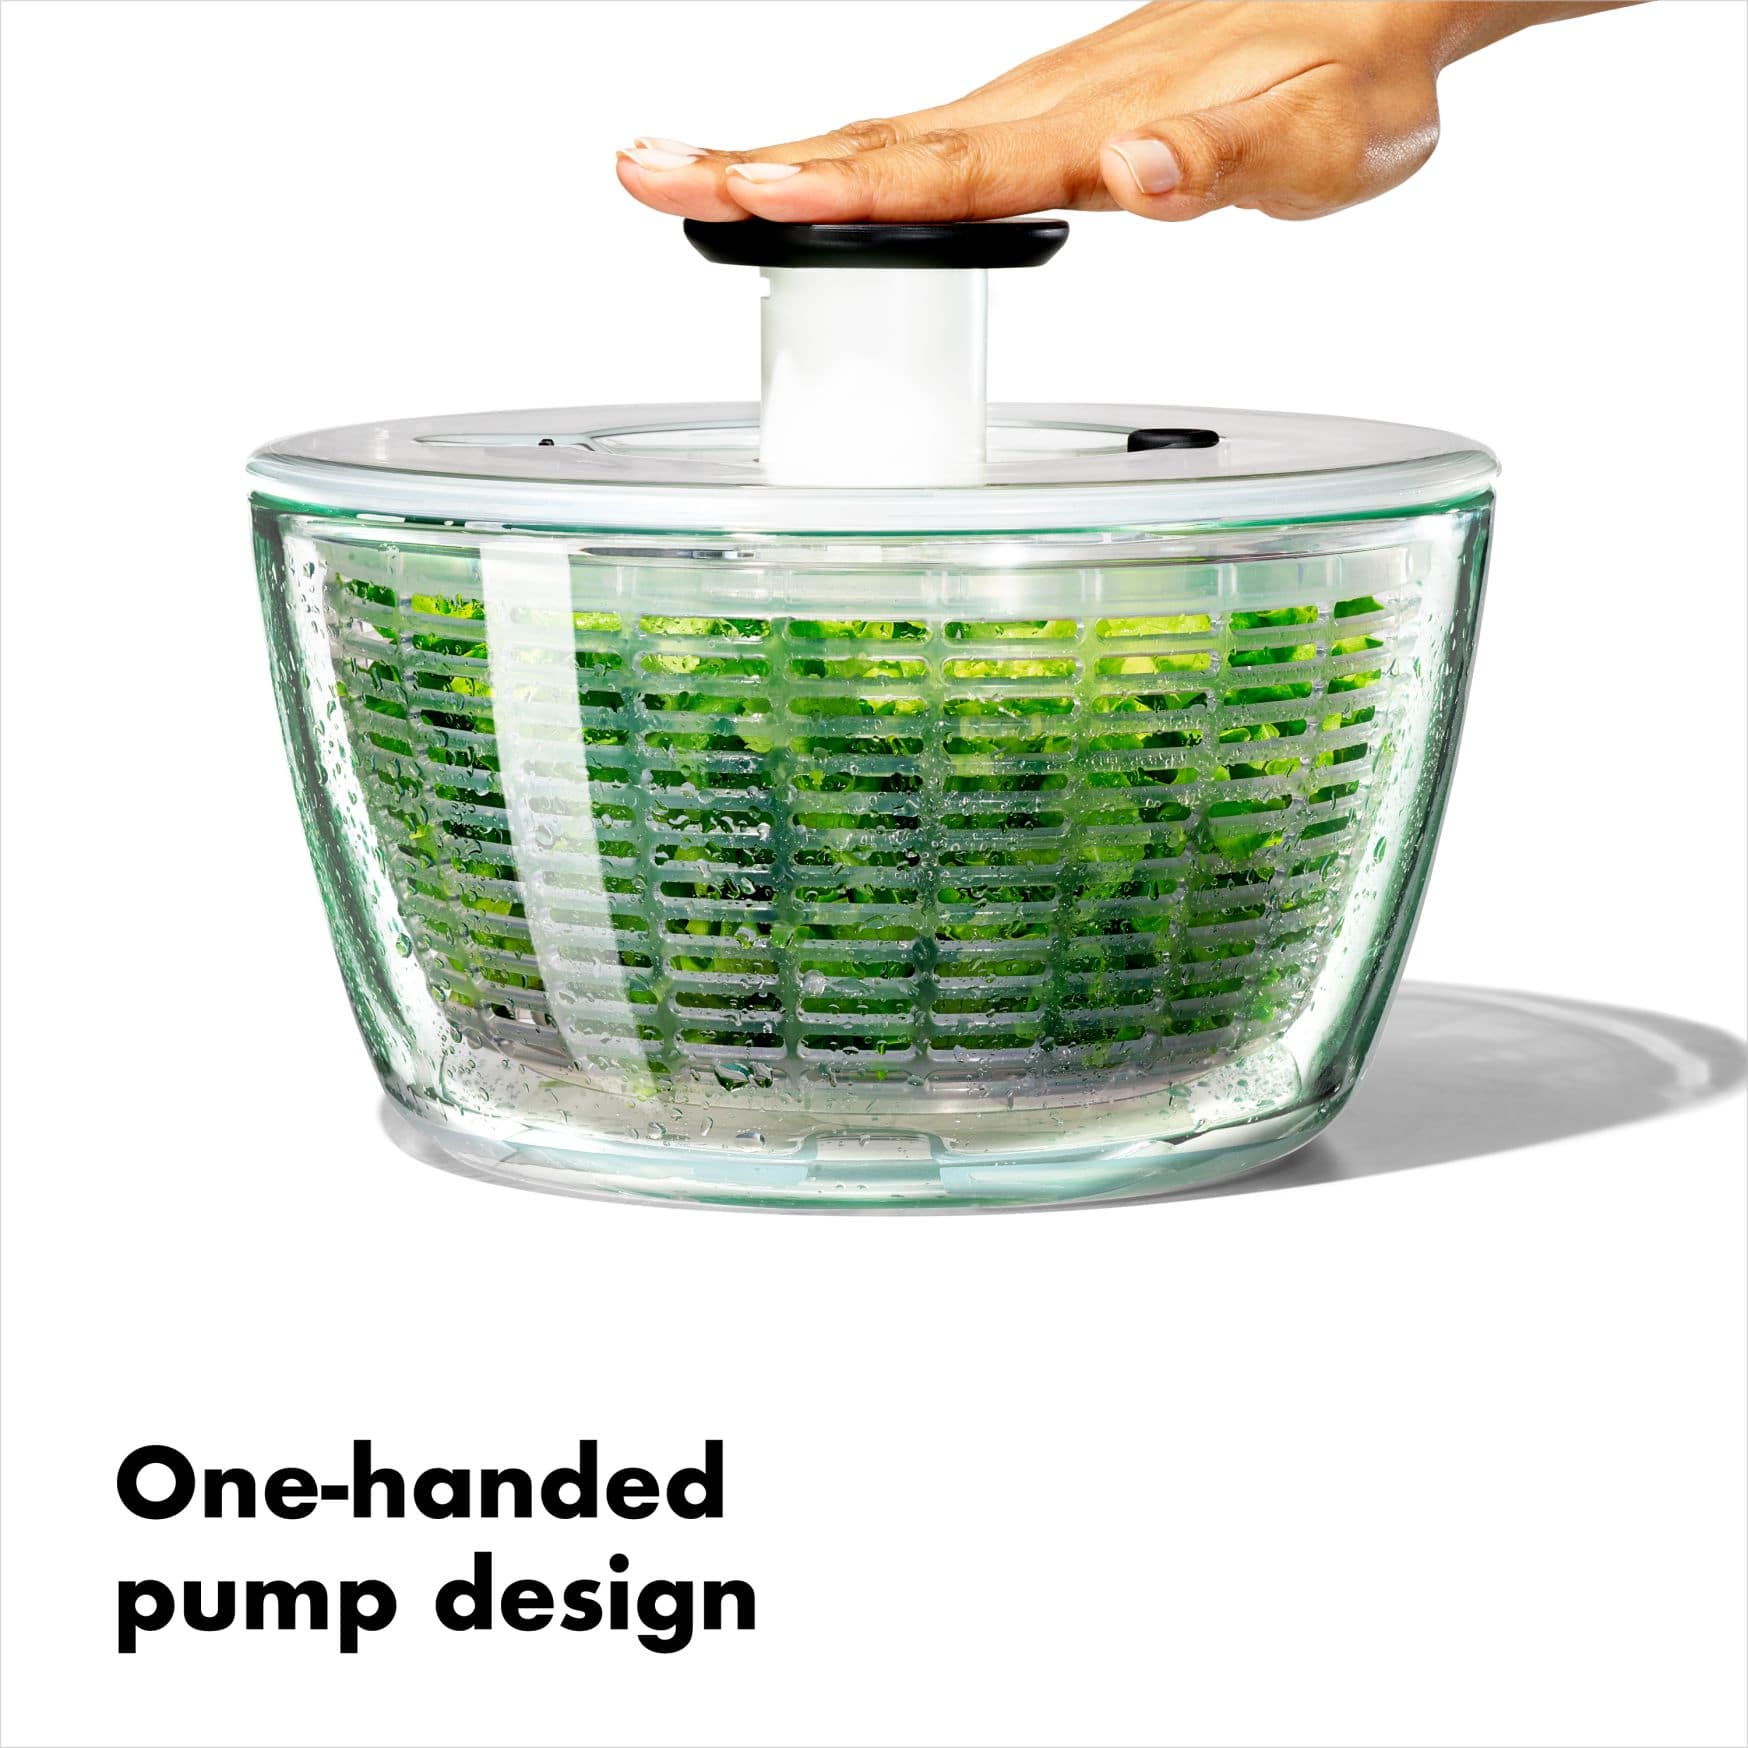  OXO Good Grips Little Salad & Herb Spinner Small: Home & Kitchen